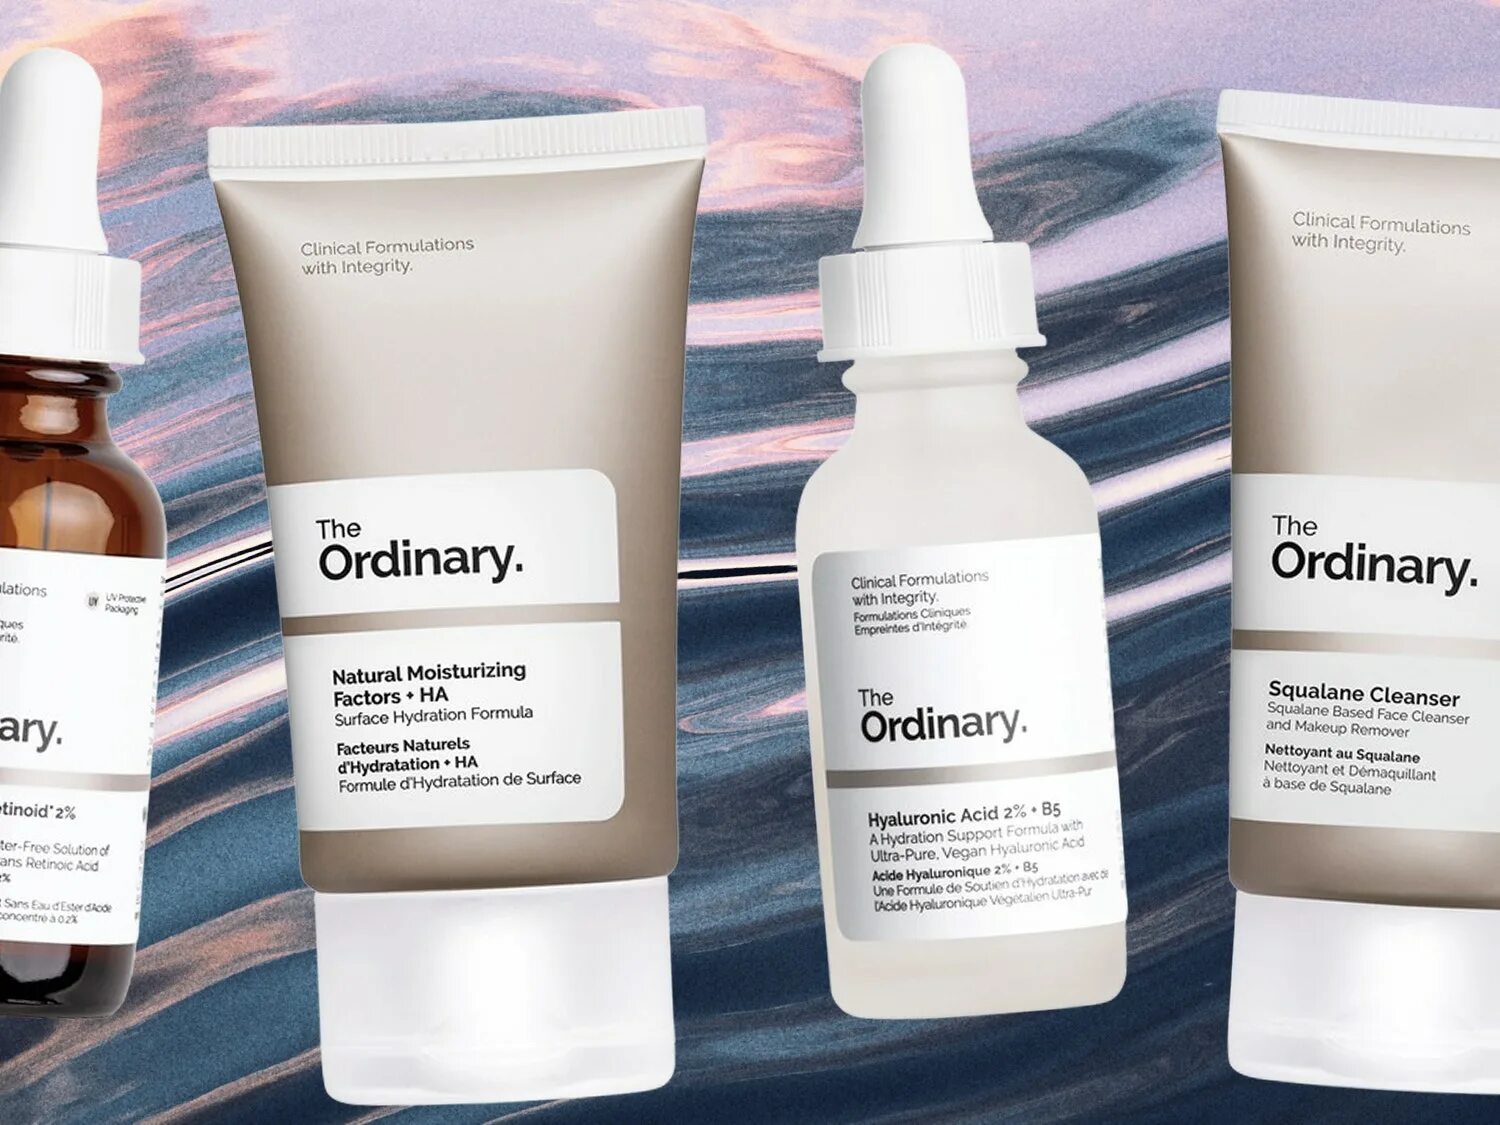 Ordinary косметика. The ordinary. The ordinary products. The ordinary Лондон. The ordinary best products.